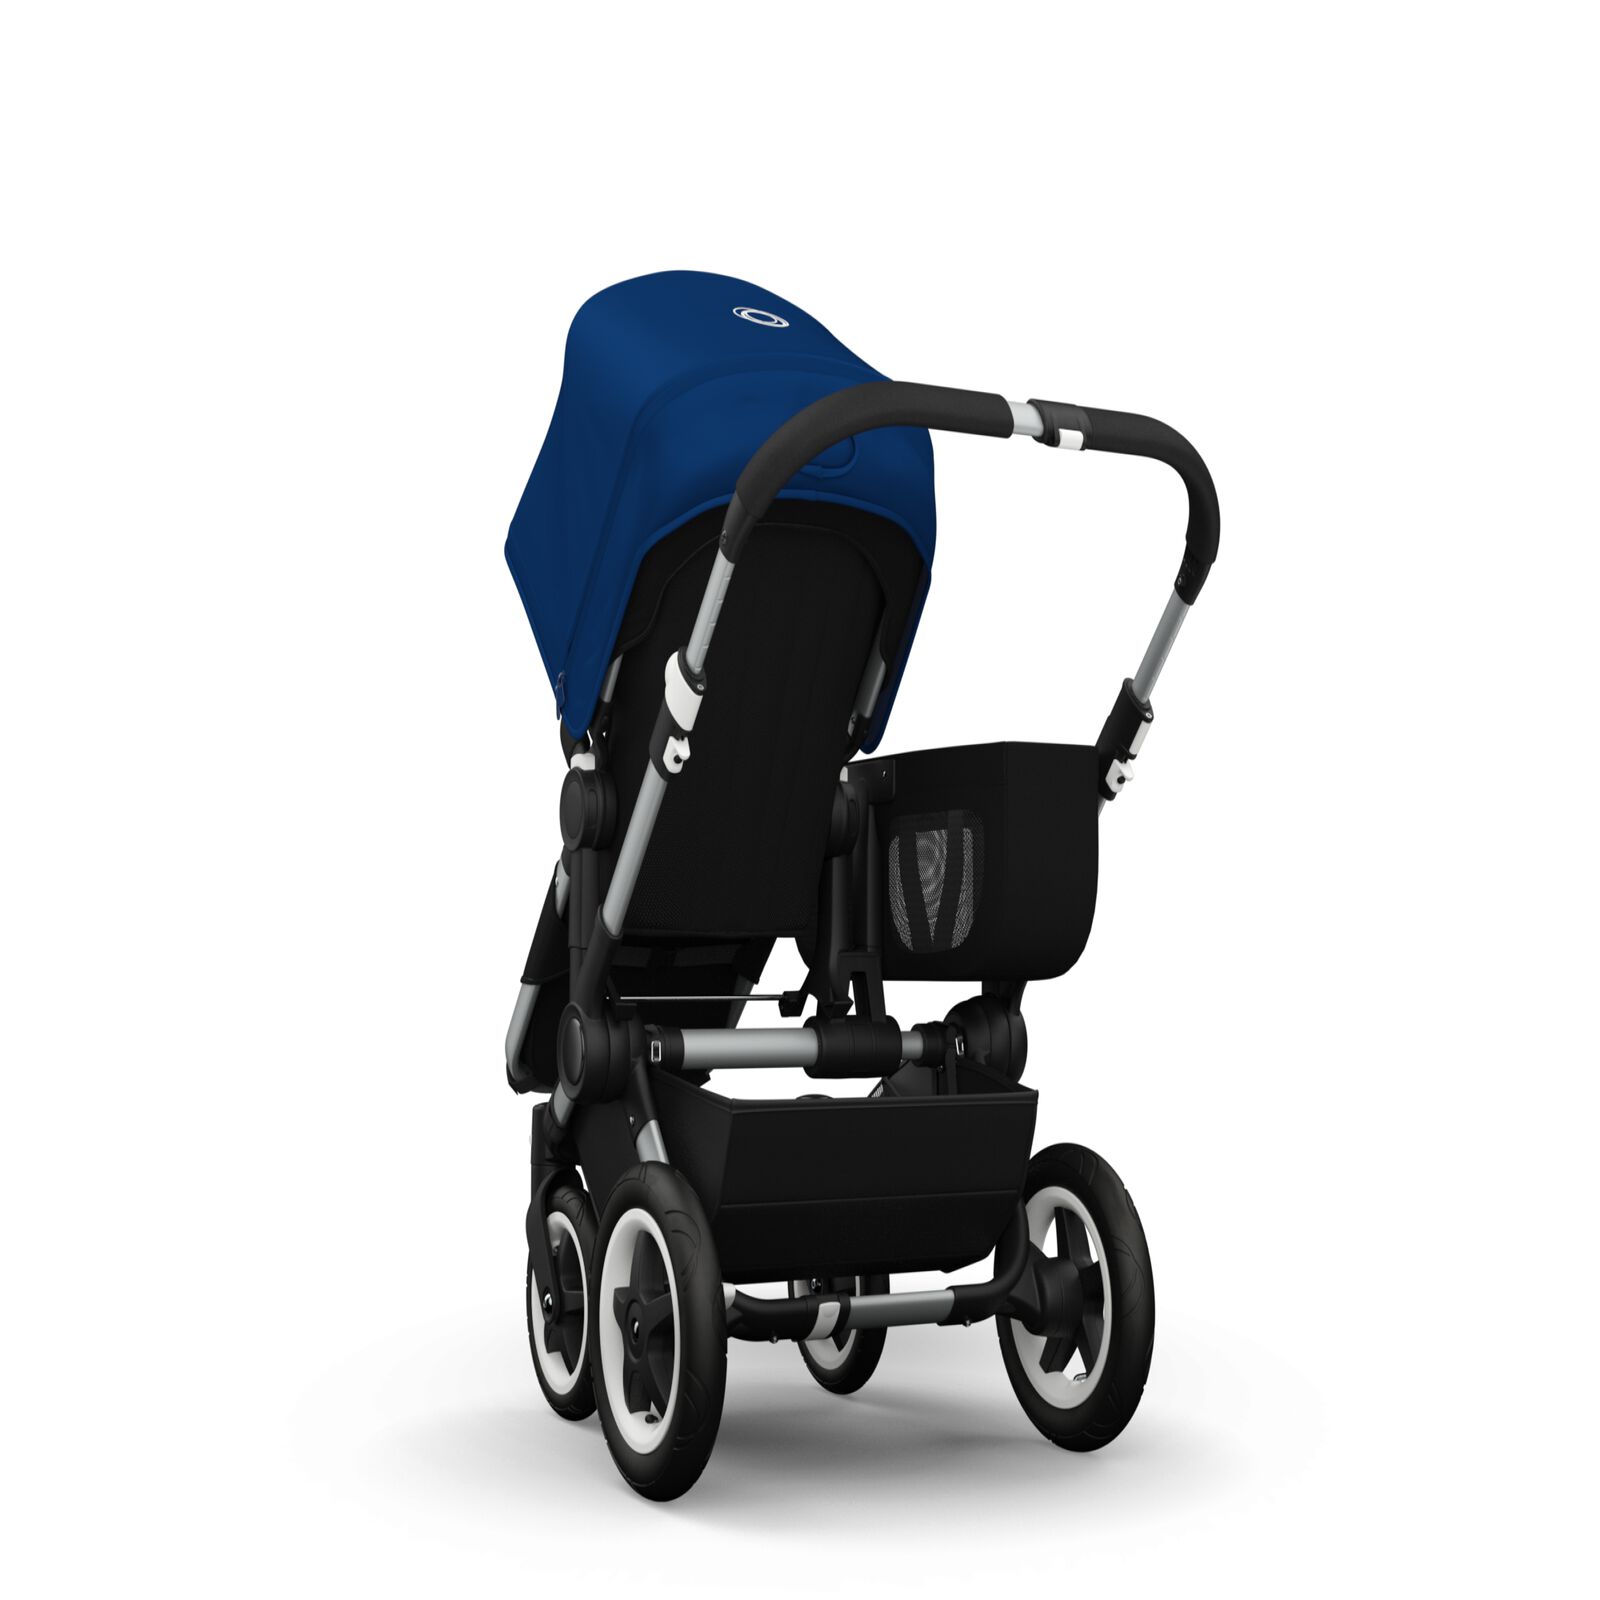 Bugaboo Donkey sun canopy (non-extendable) - View 6